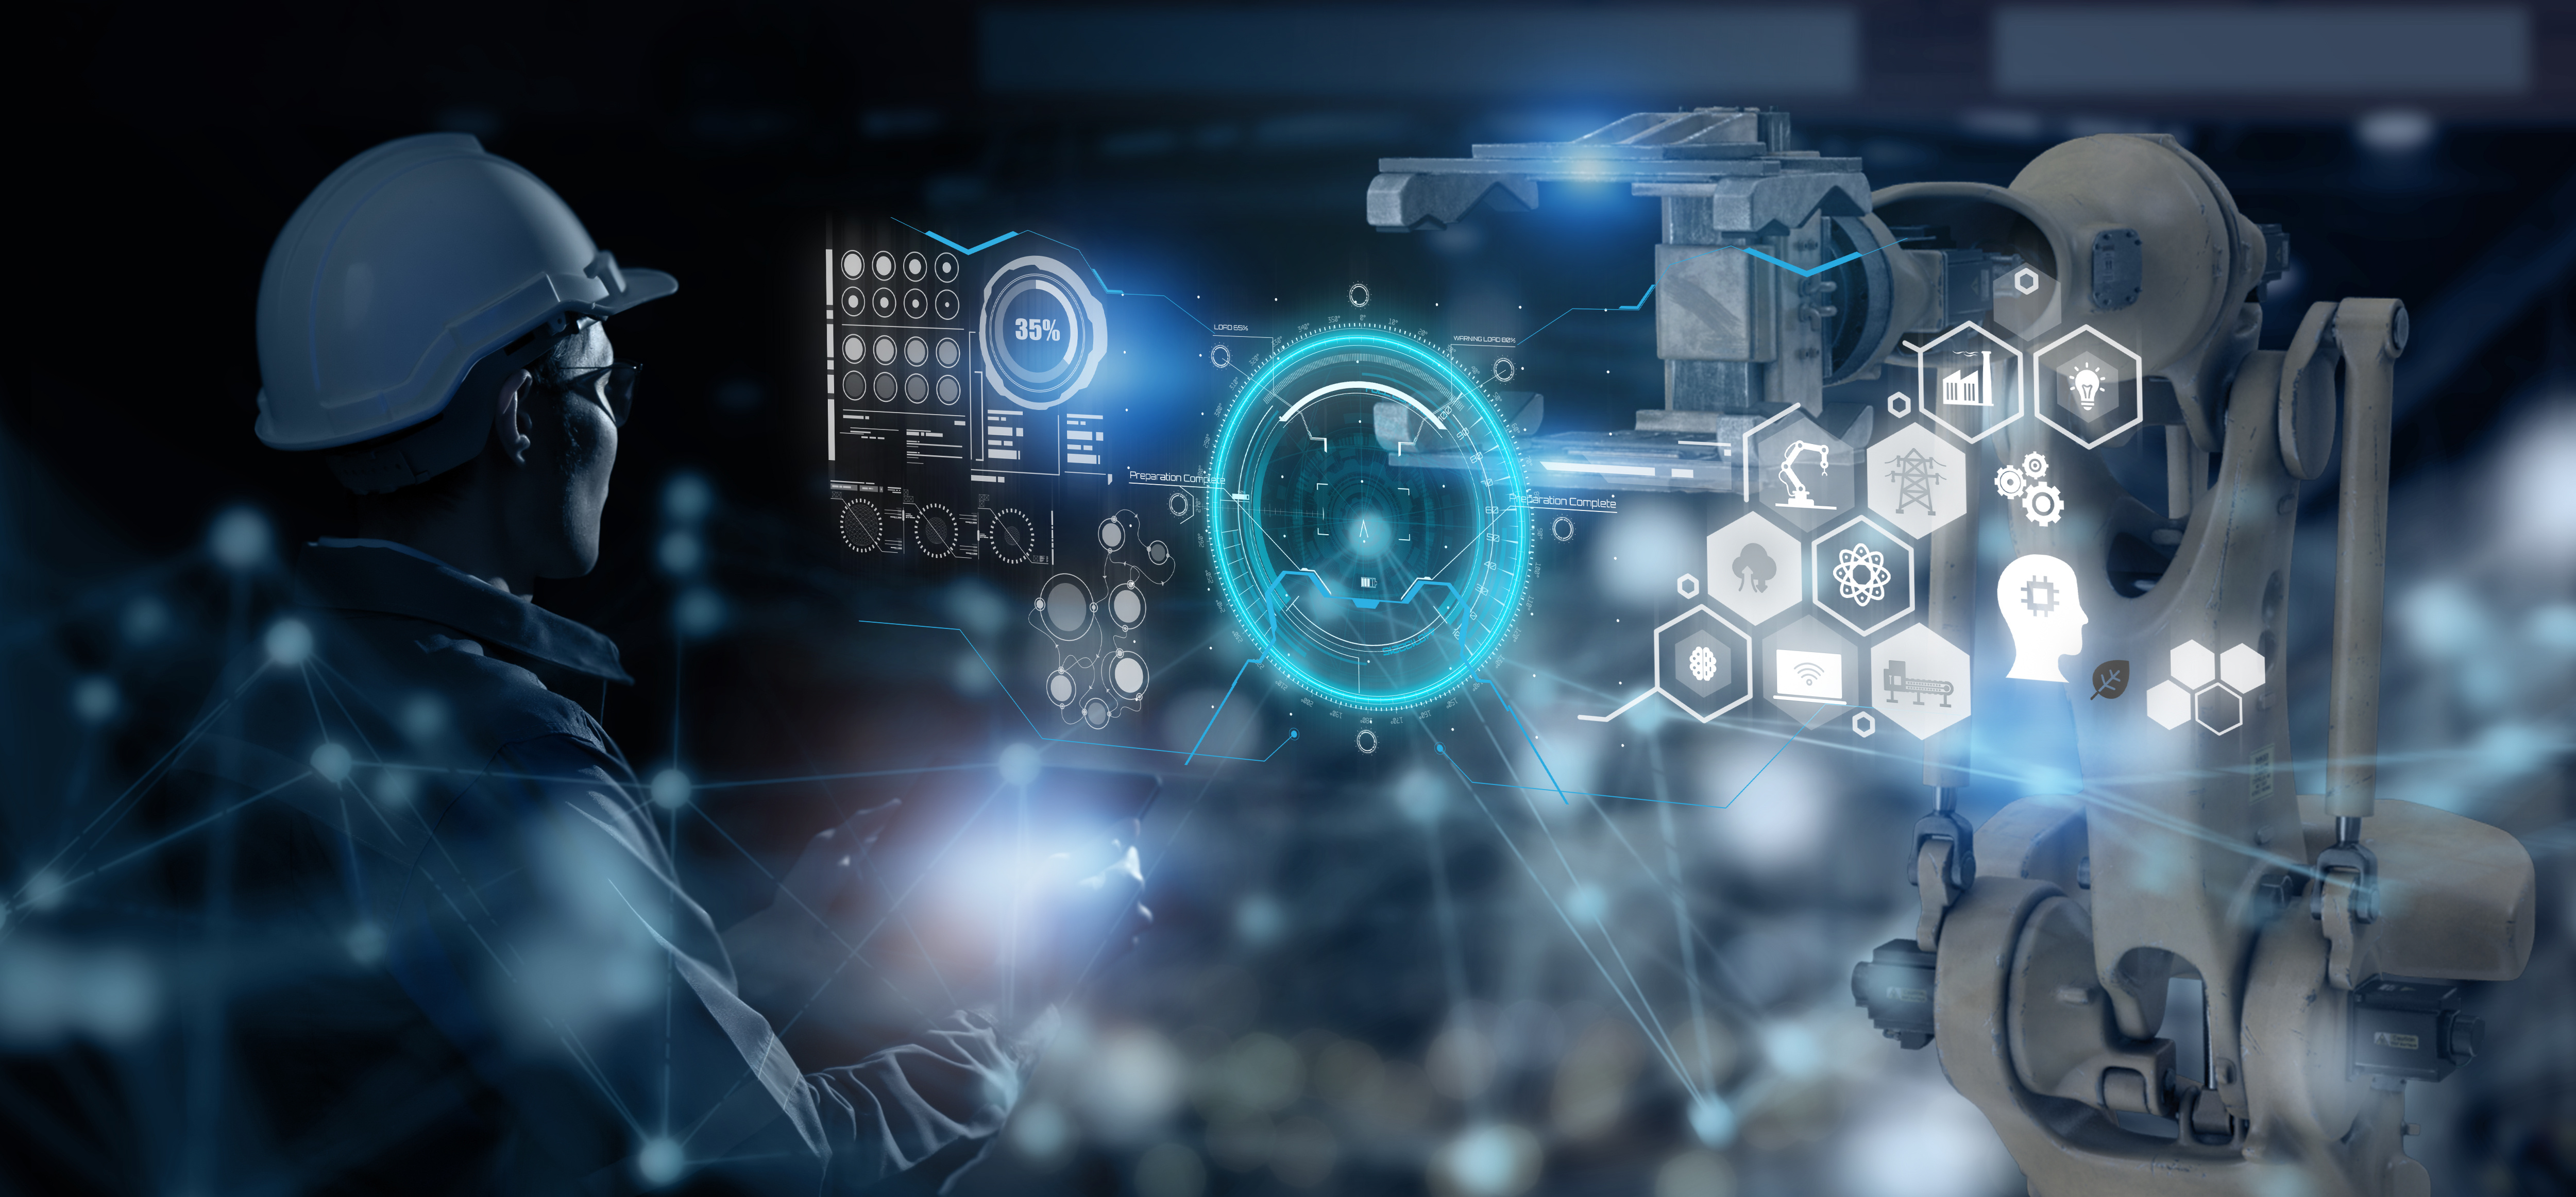 3 Benefits of Operationalizing AI in Manufacturing